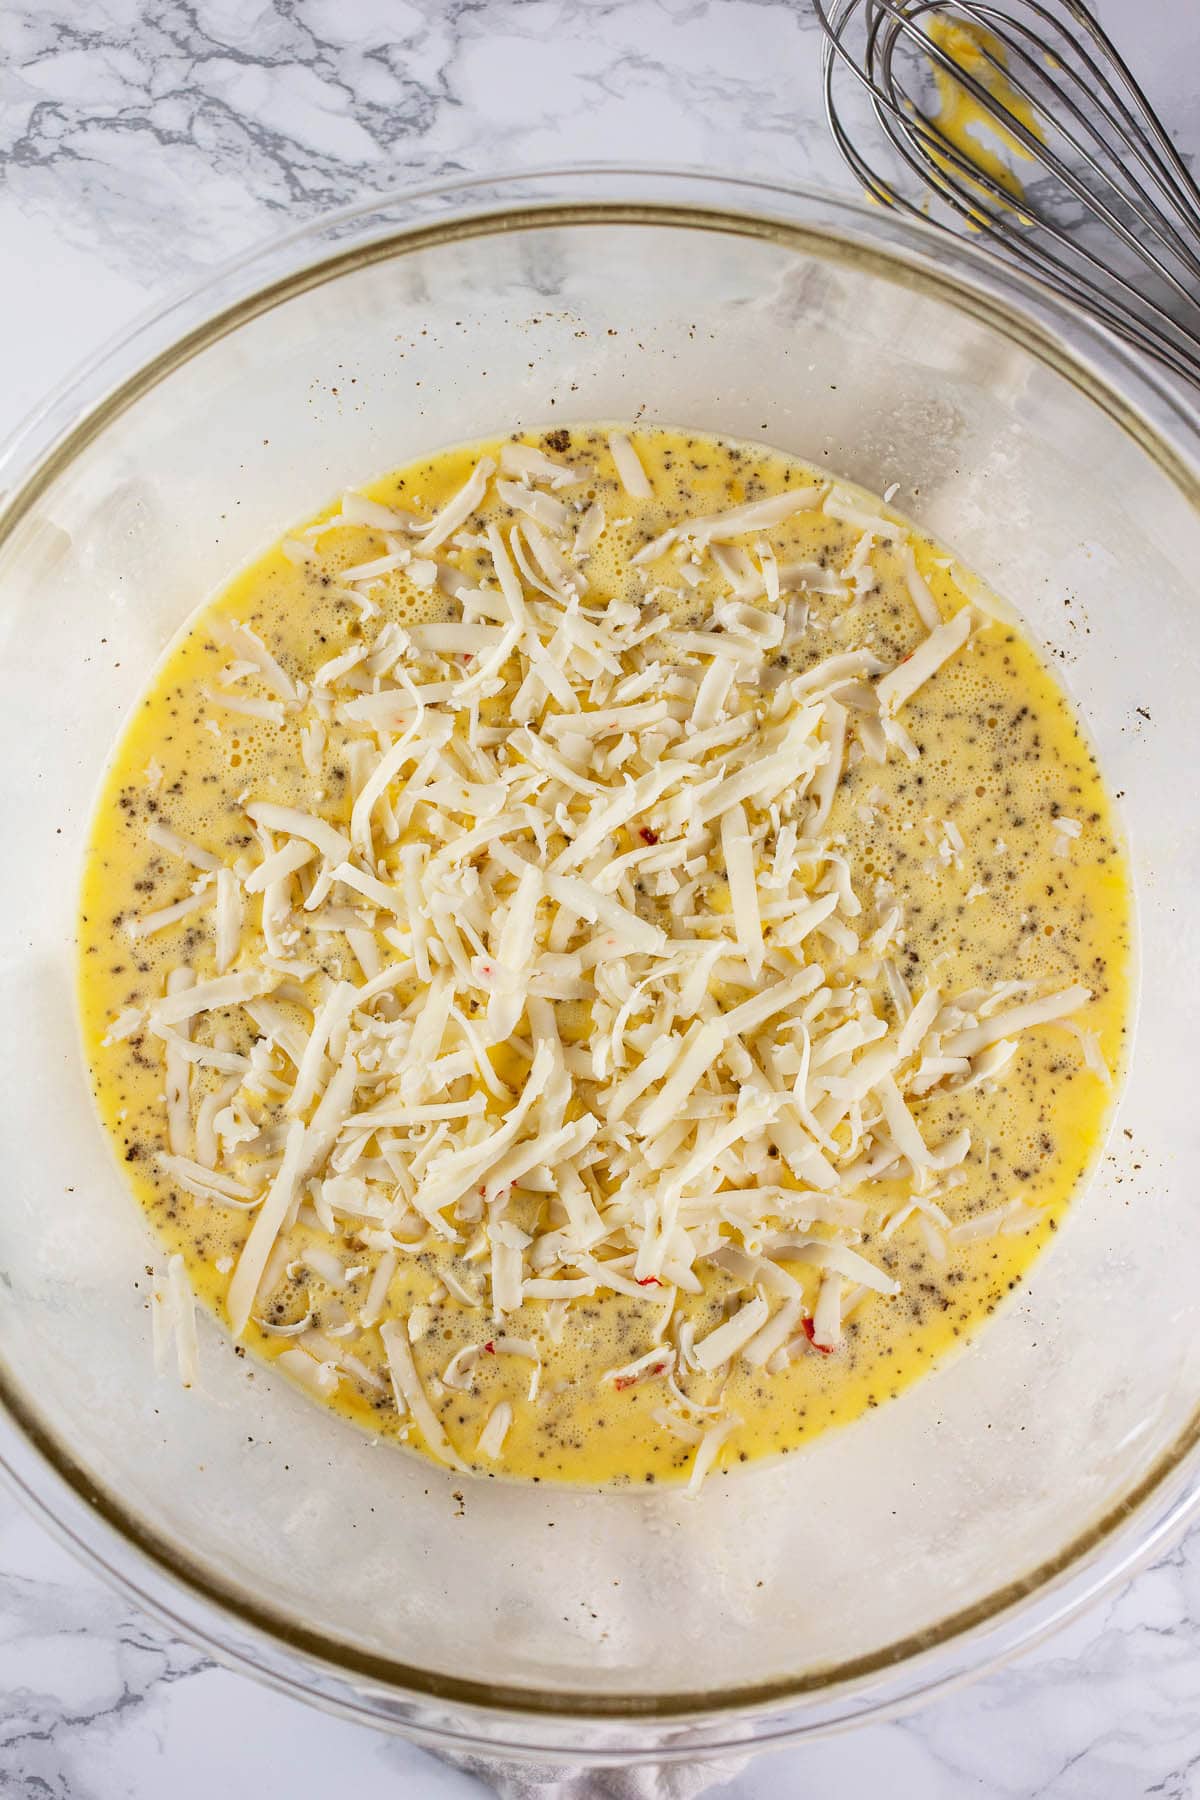 Whisked eggs with shredded cheese in large glass mixing bowl.